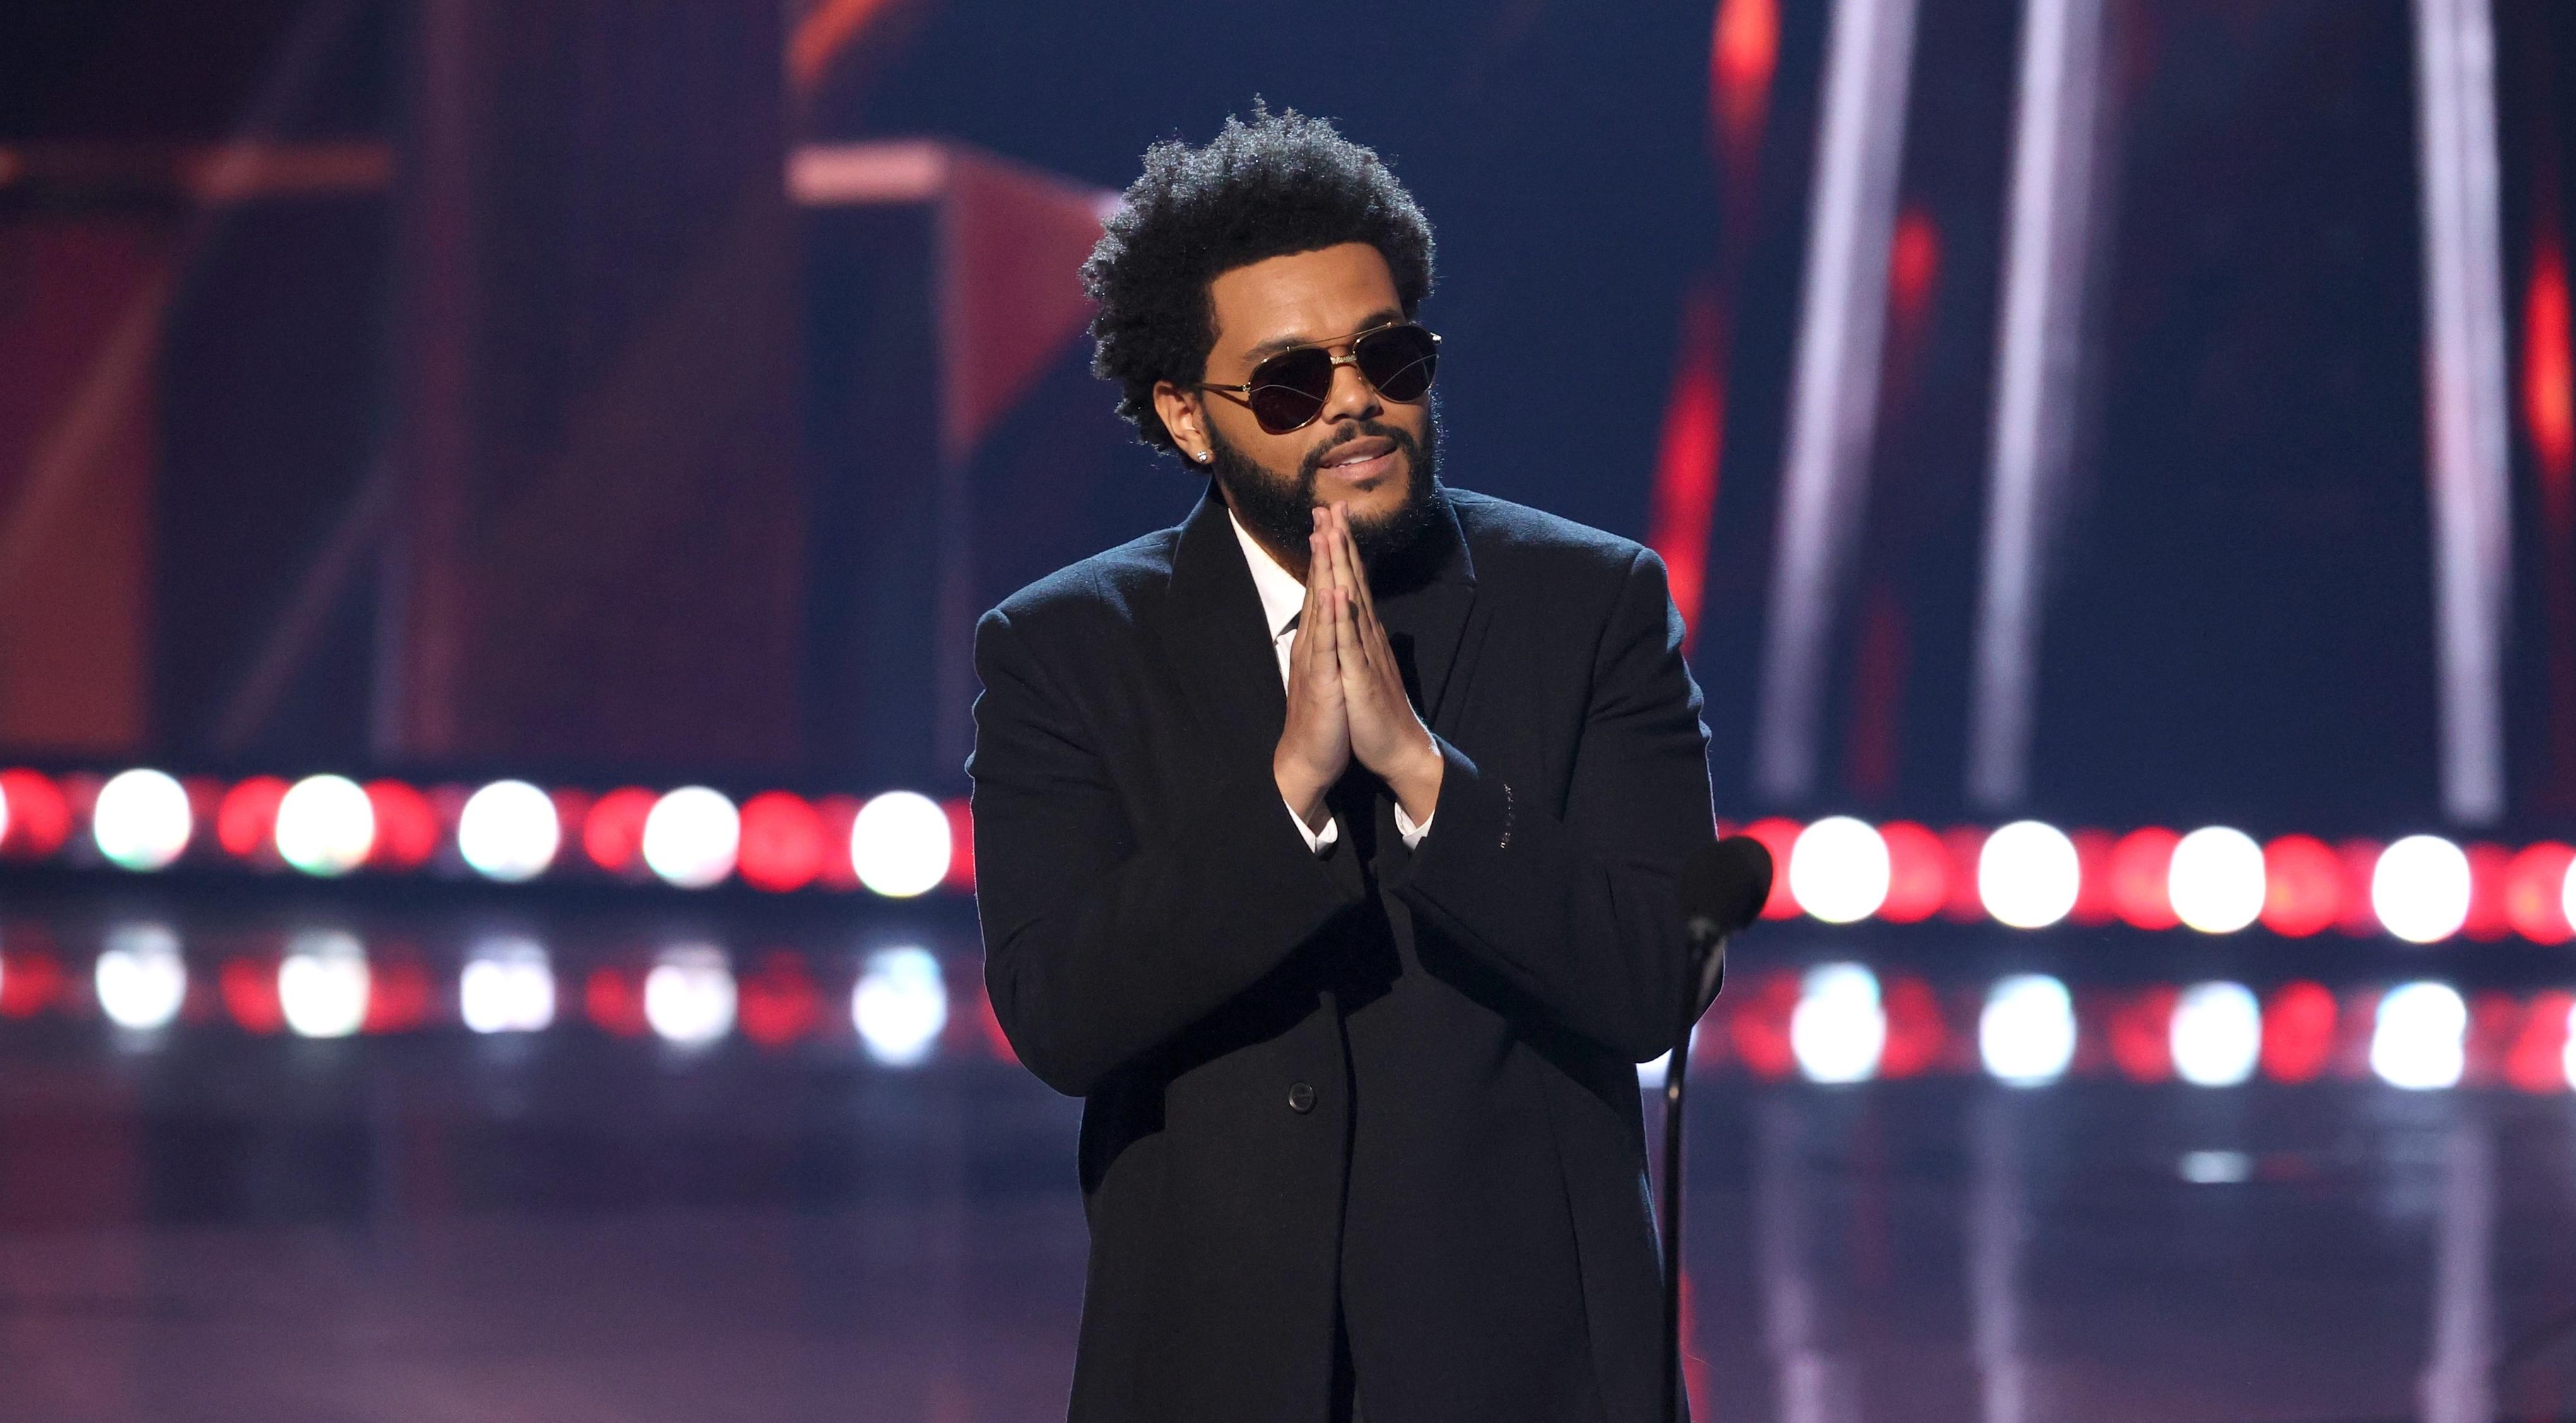 Canadian singer The Weeknd.